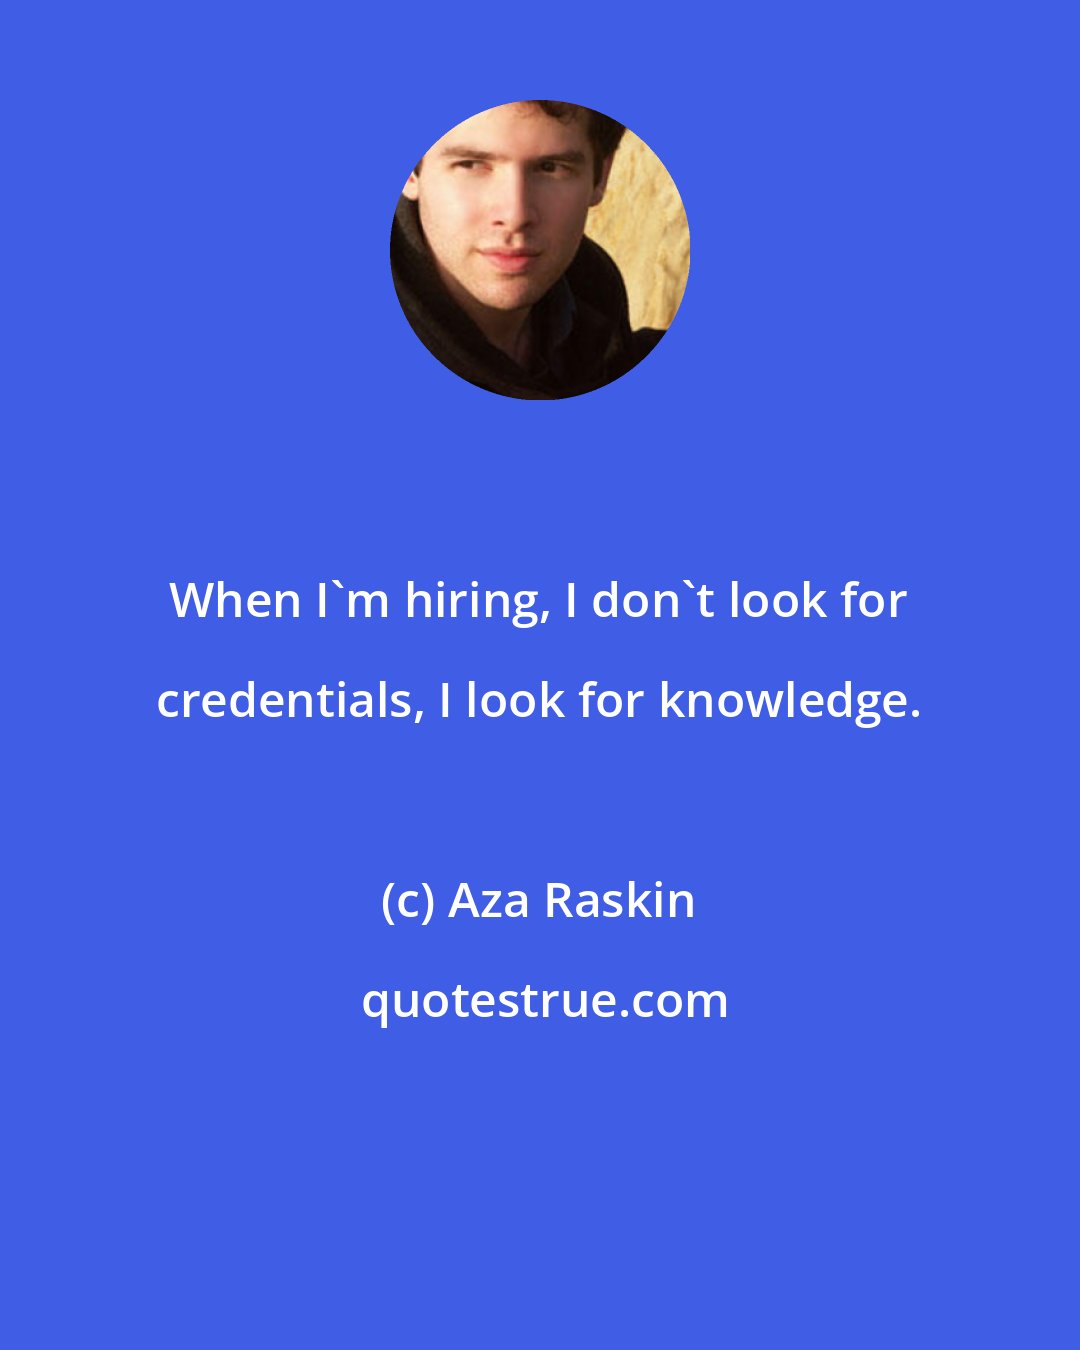 Aza Raskin: When I'm hiring, I don't look for credentials, I look for knowledge.